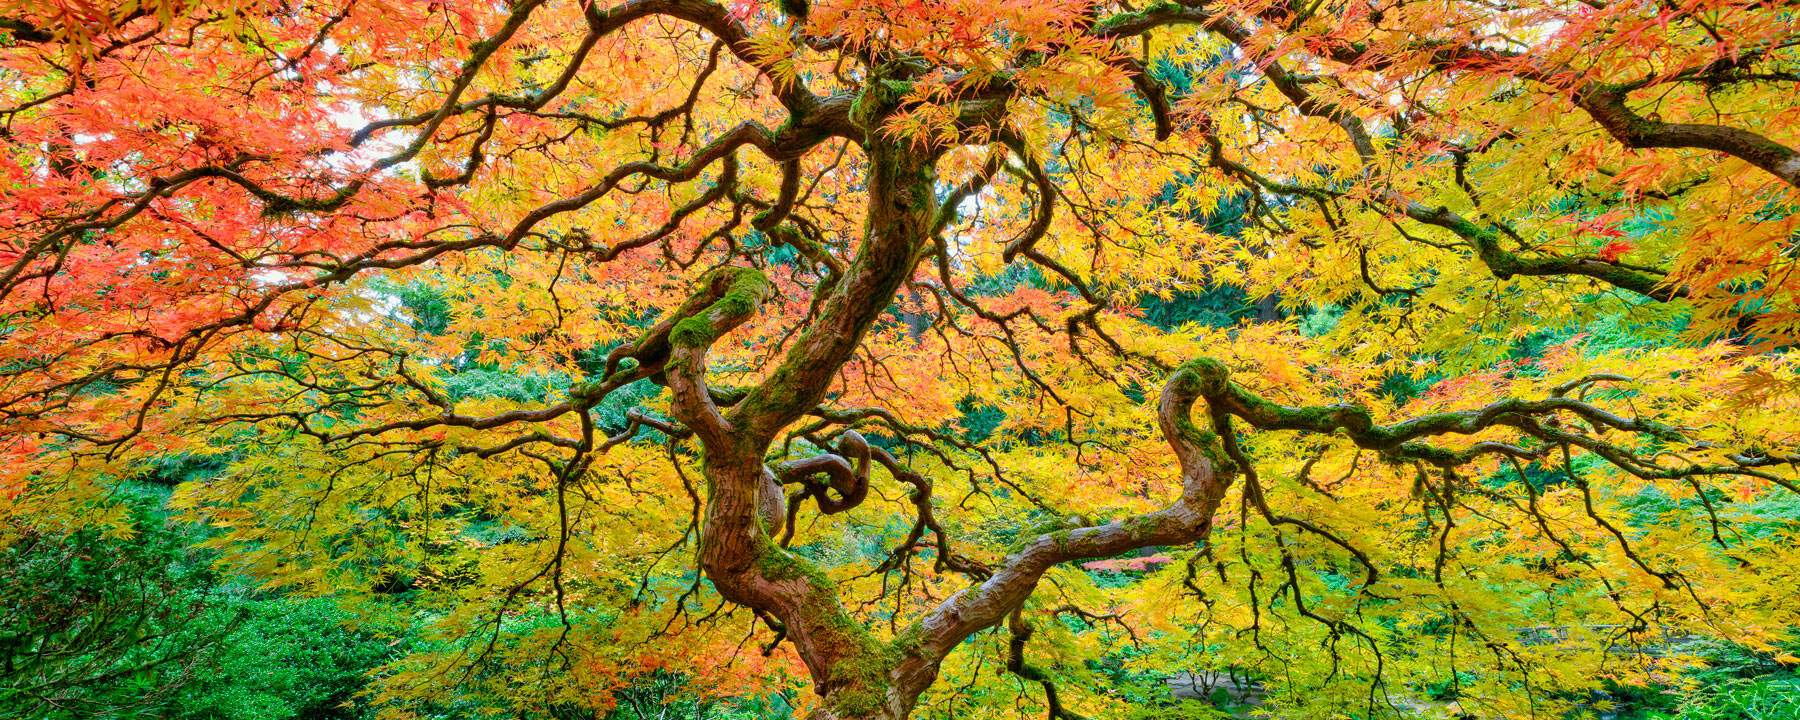 a beautiful panorama captured by photographer Andrew Shoemaker of a Japanese lace maple tree in the Portland Japanese garden in Oregon.  Autumn colors galore